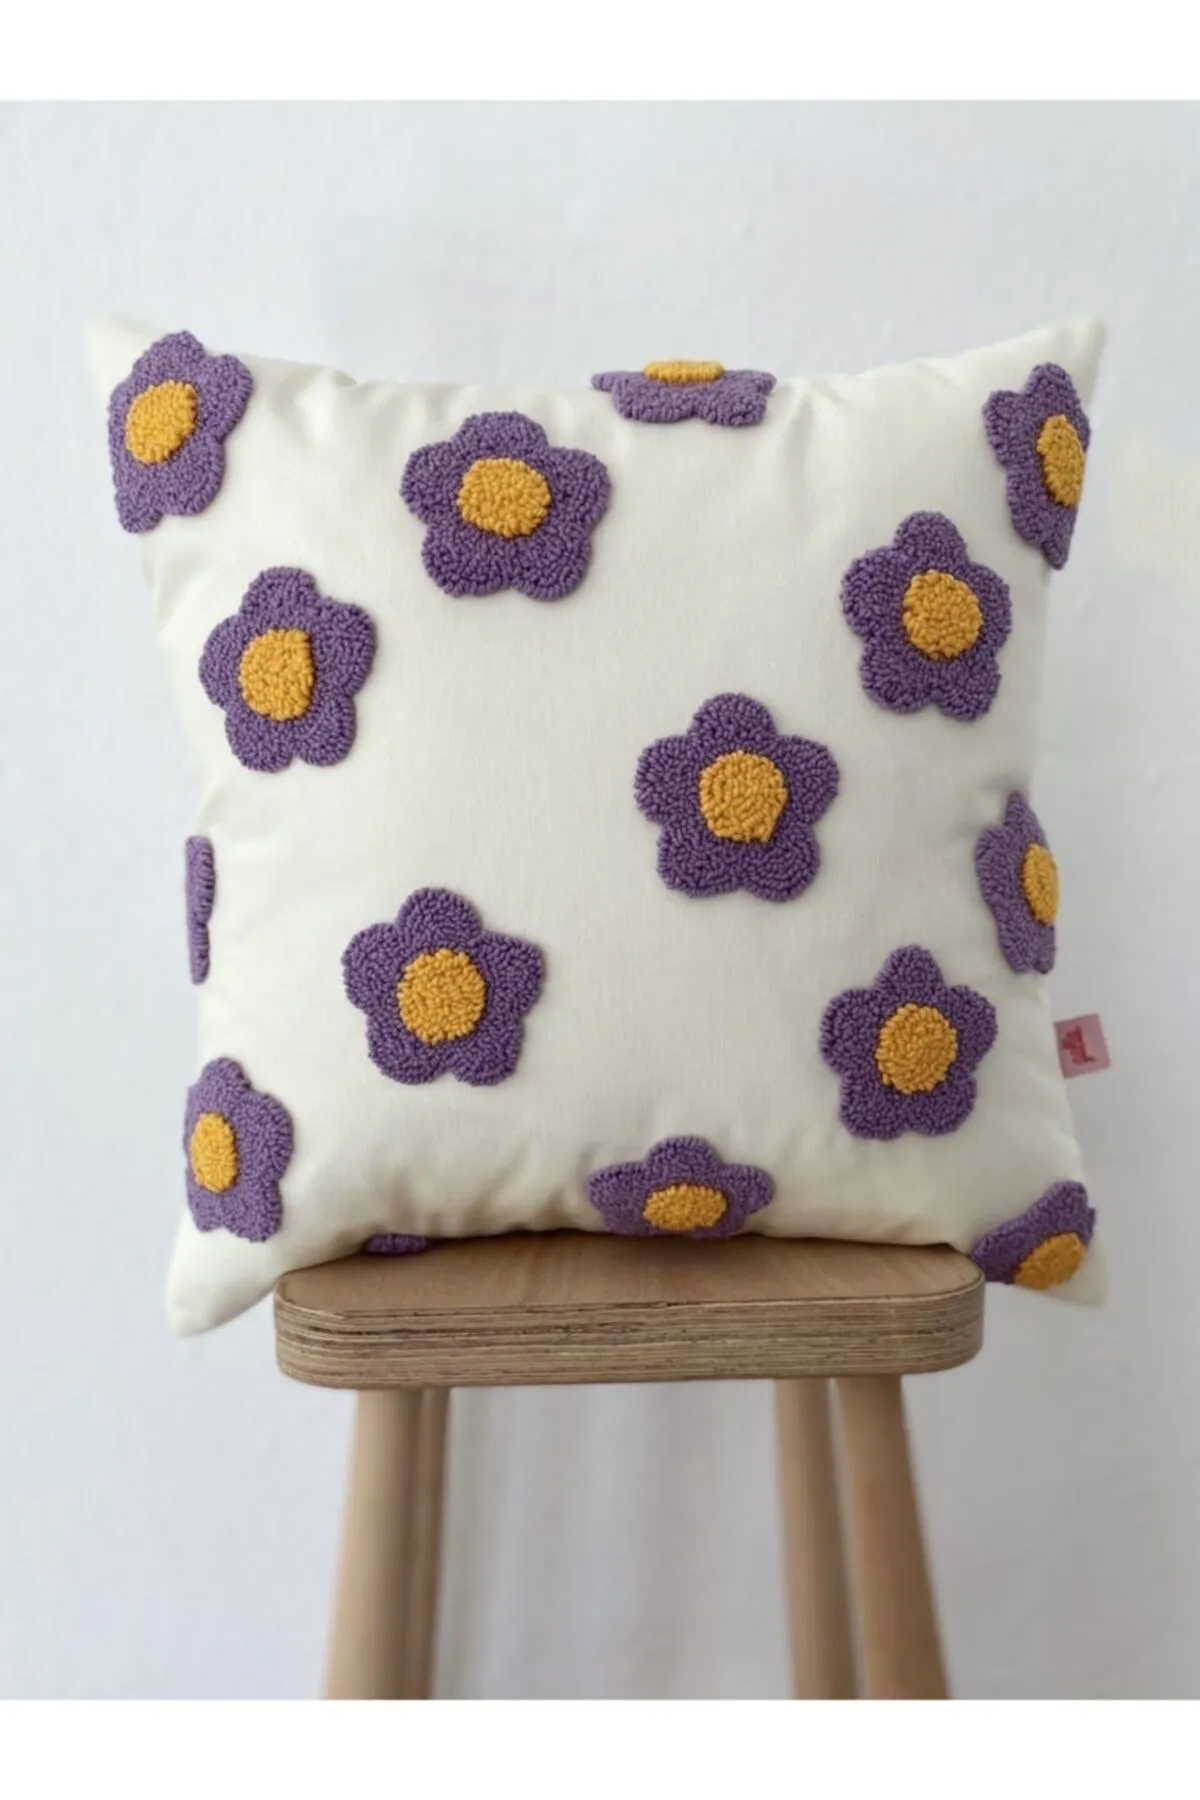 Daisy Flower Pattern Punch Cushion Pillow Cover Lilac